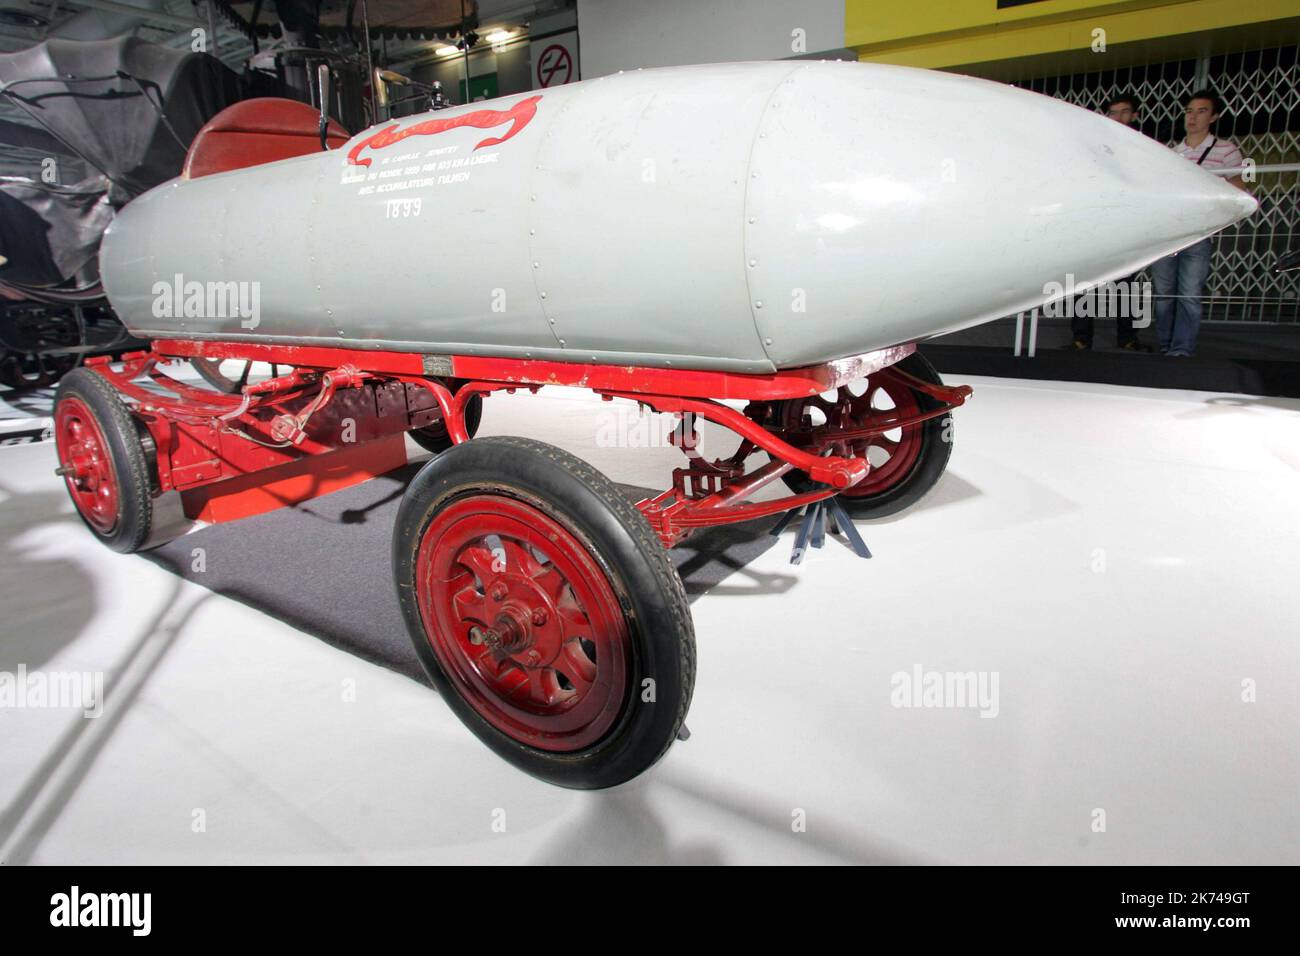 La Jamais Contente, in English 'The Never Satisfied', is an electric car that beat the world speed record with 105km/h in 1899. Here it is on show at the Paris Motor Show in 2006. Stock Photo